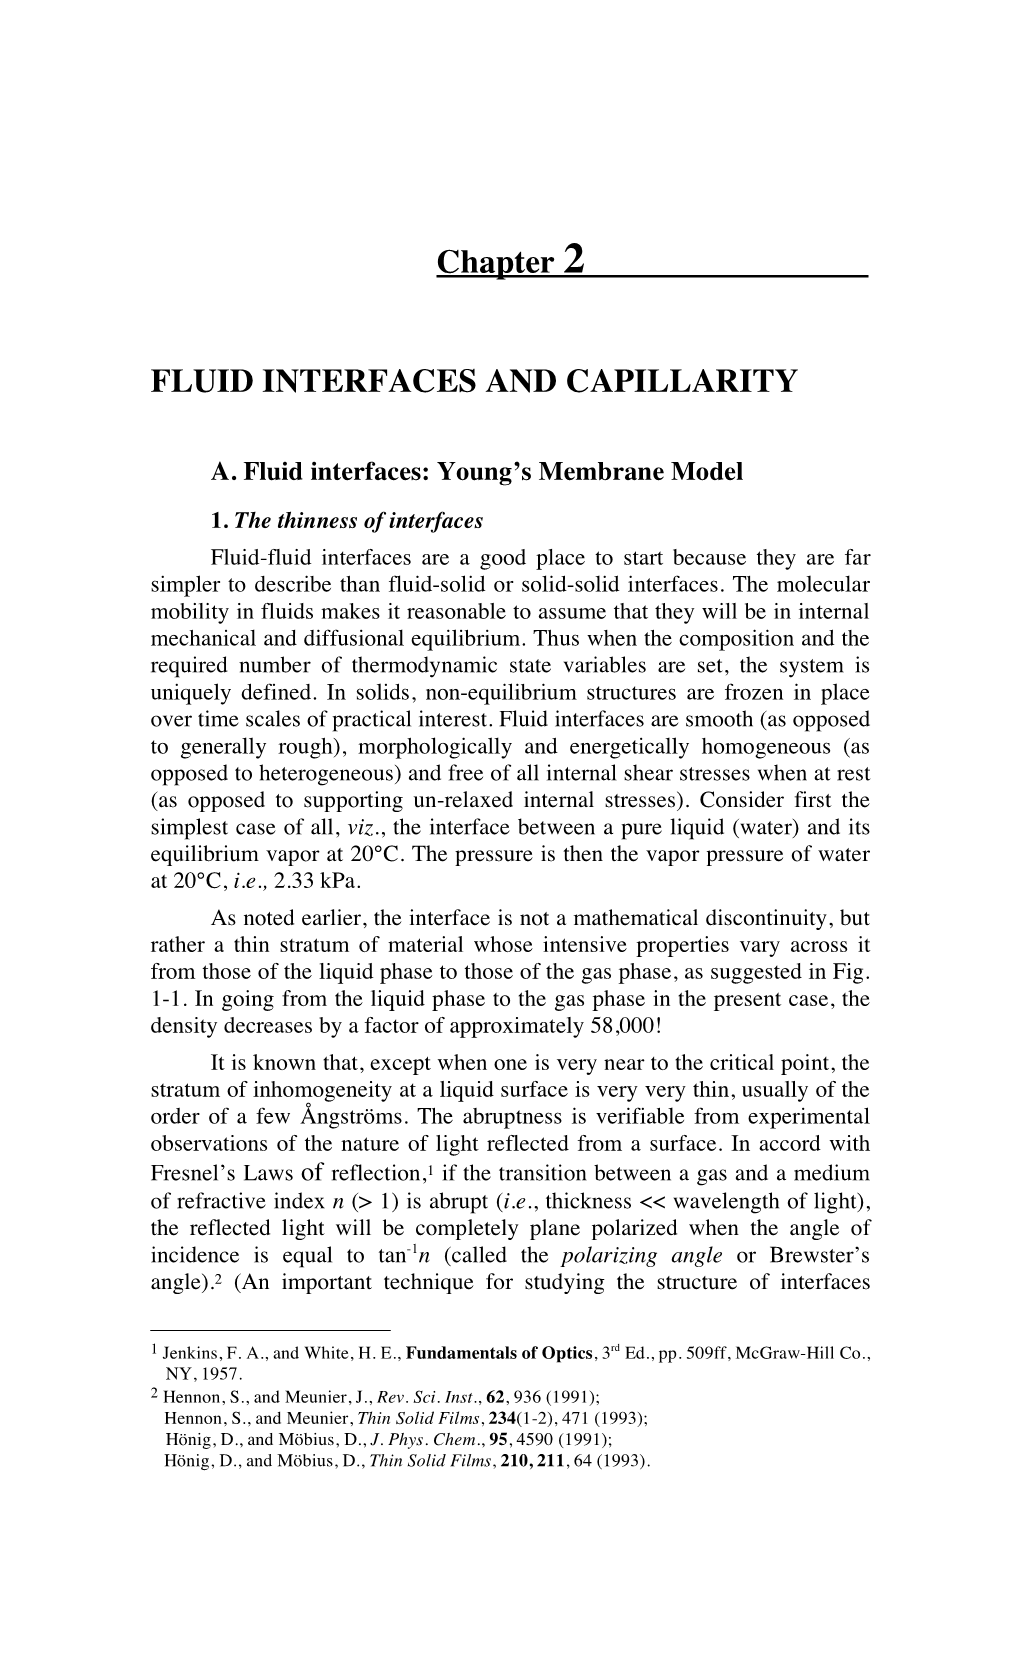 Chapter 2 FLUID INTERFACES and CAPILLARITY